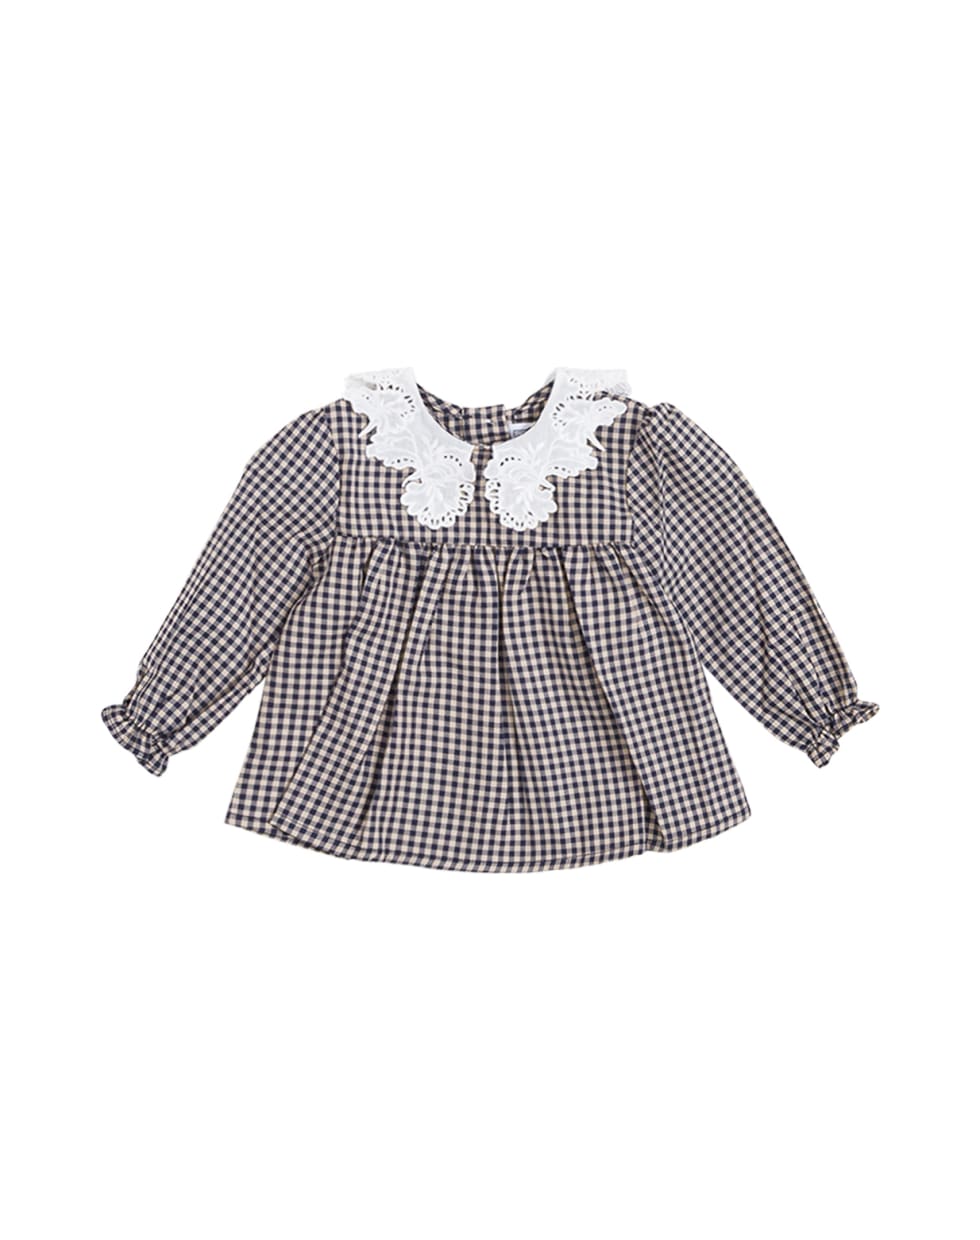 Tartine et Chocolat Voyage Check Cotton Shirt With Lace Collar - Multicolor